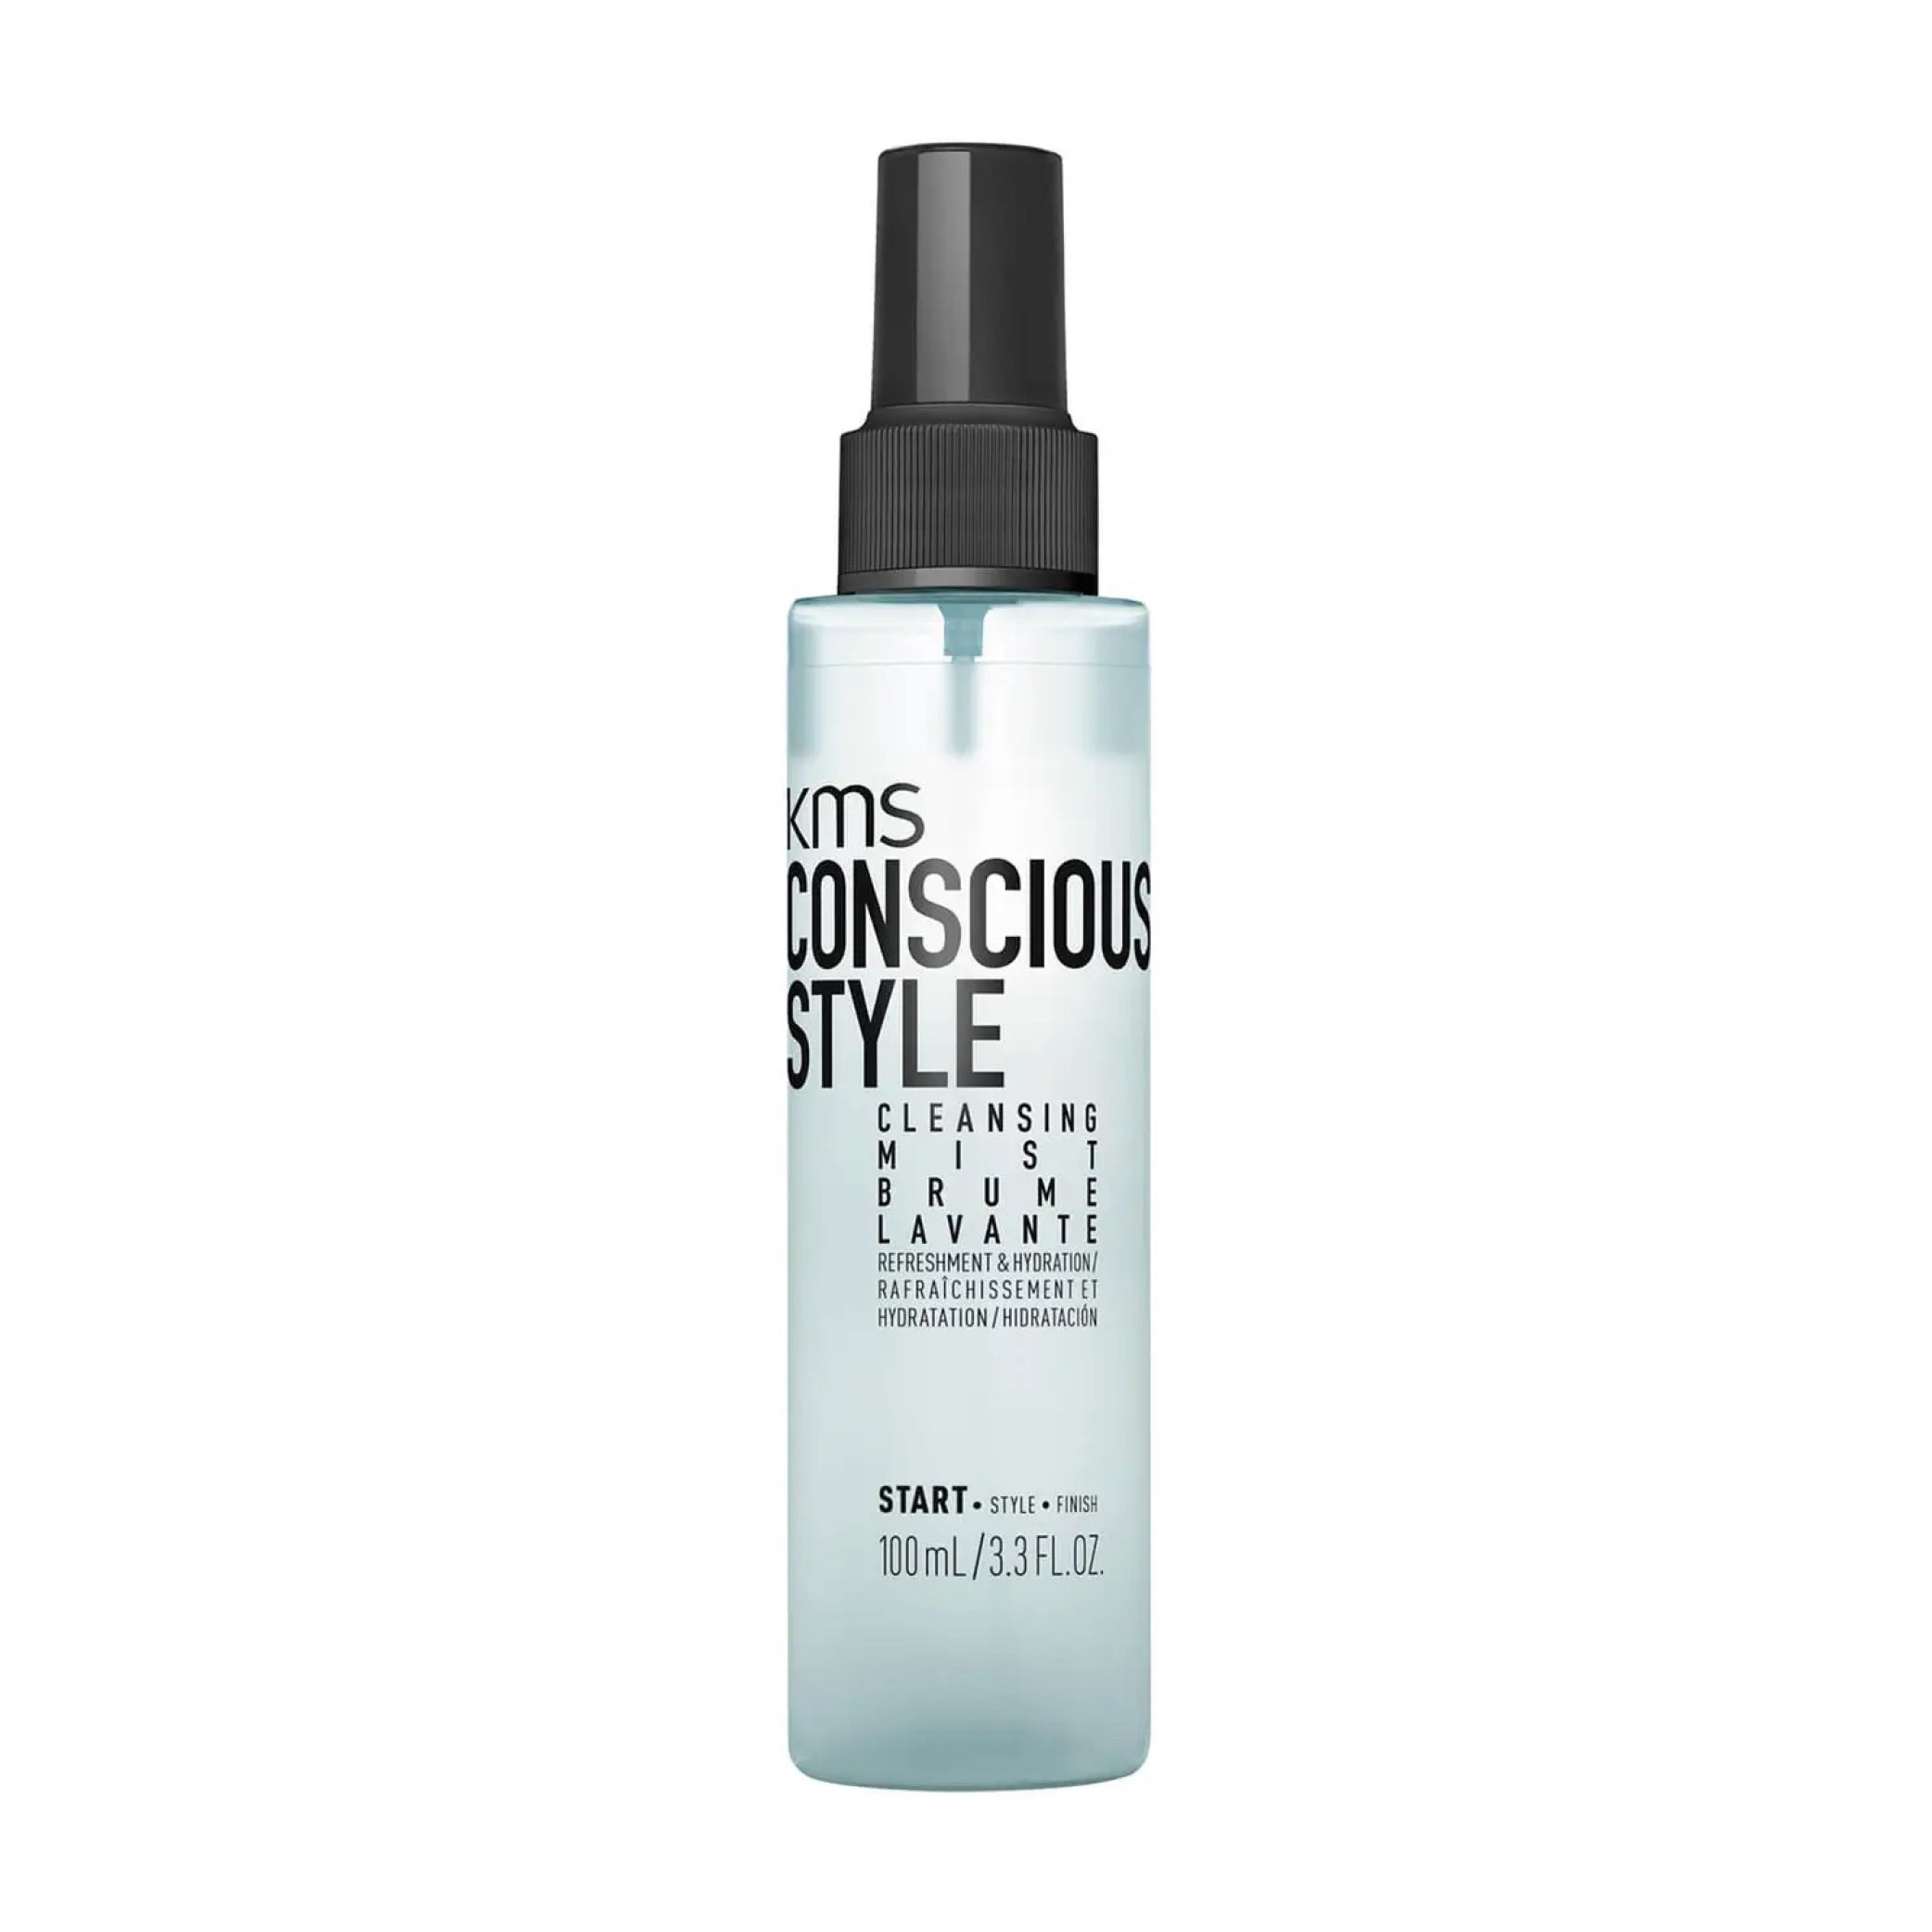 CONSCIOUSSTYLE Cleansing Mist